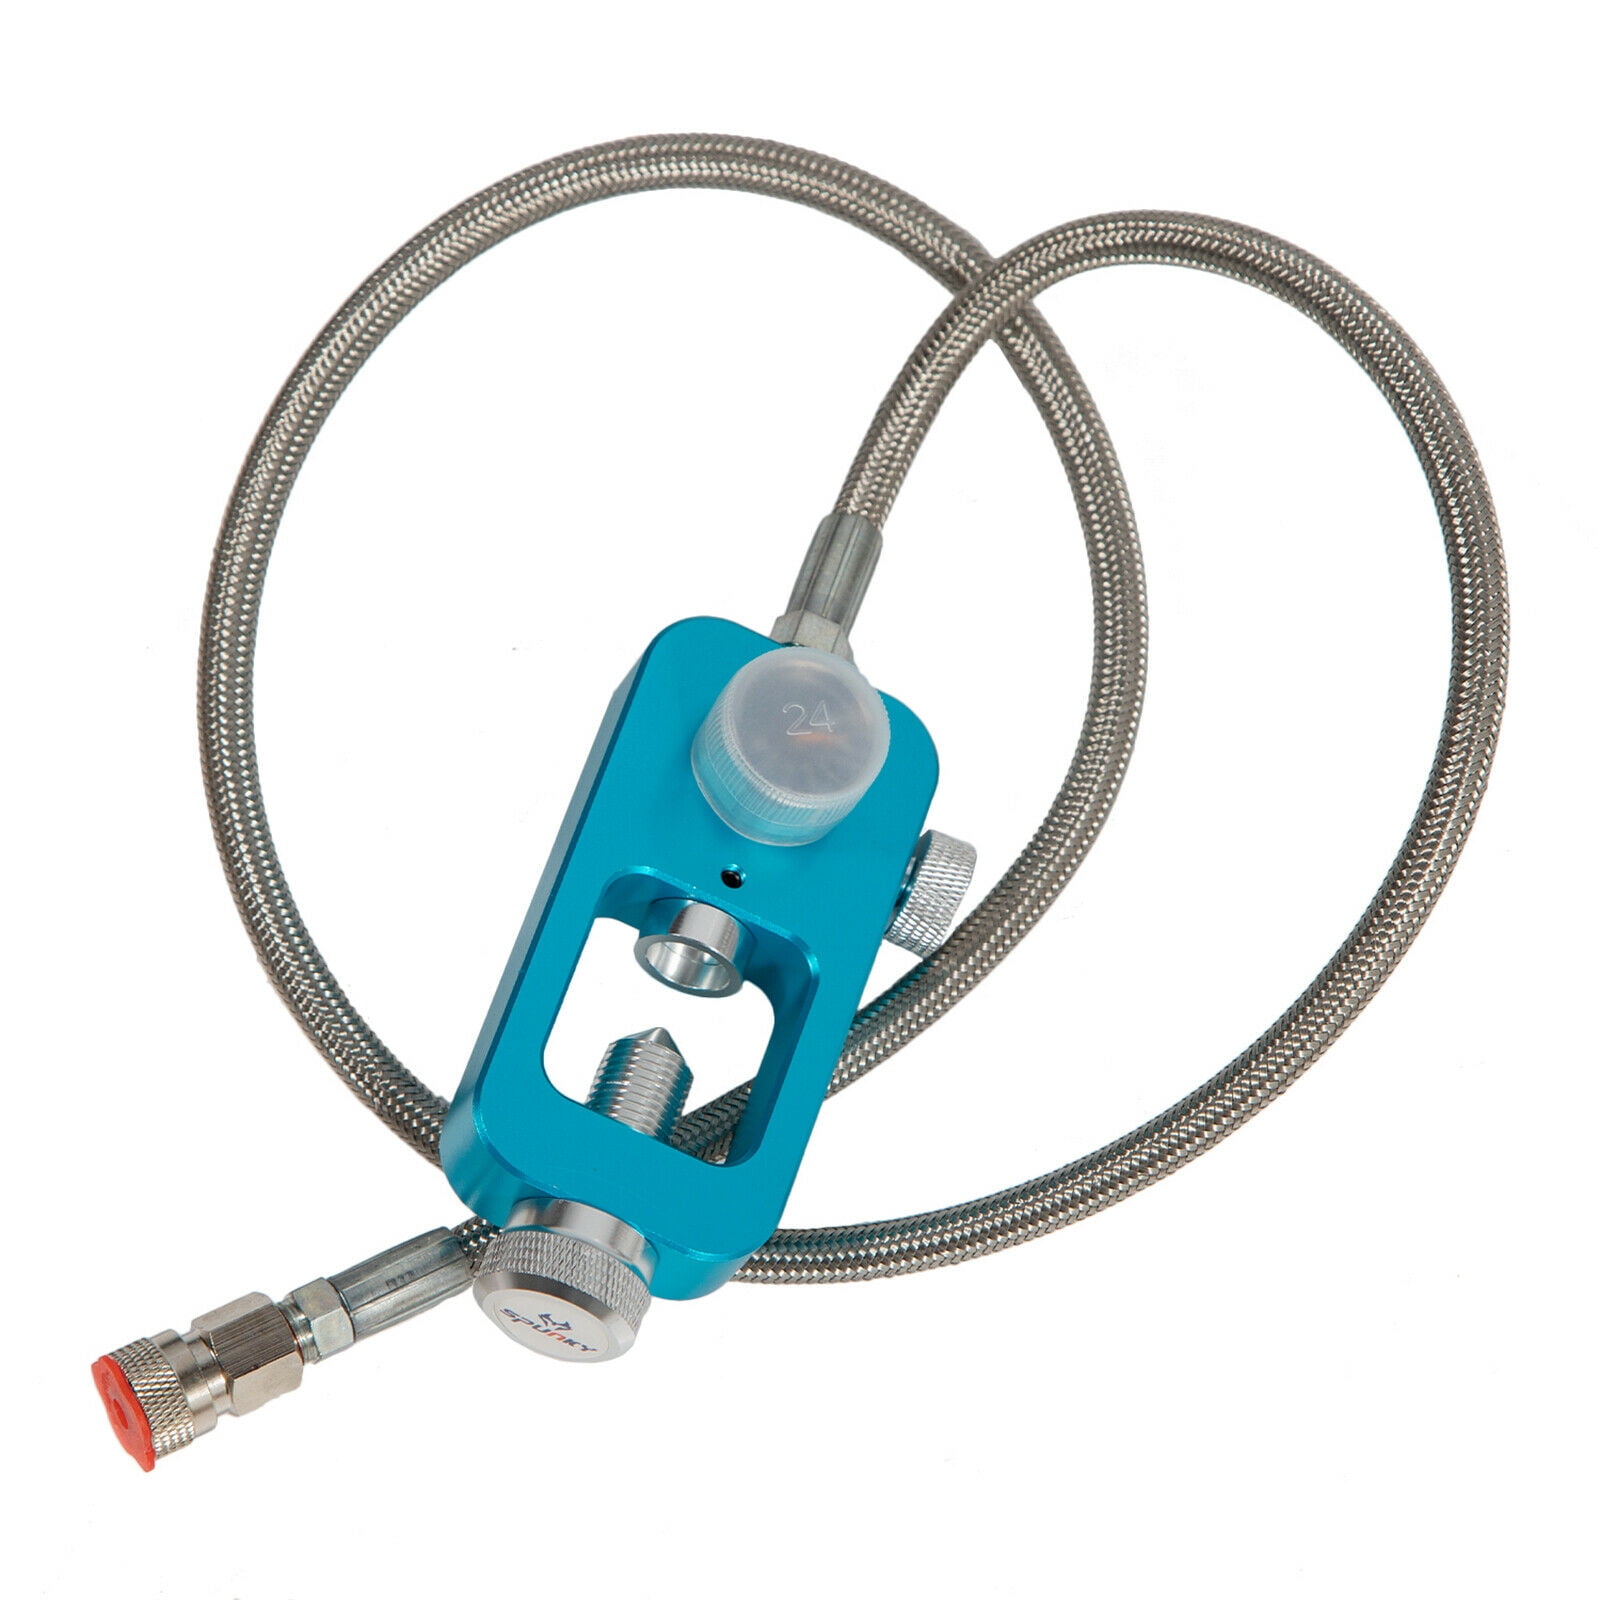 New HPA High Pressure Air Scuba DIN Fill Station Adapter with High Pressure whip 